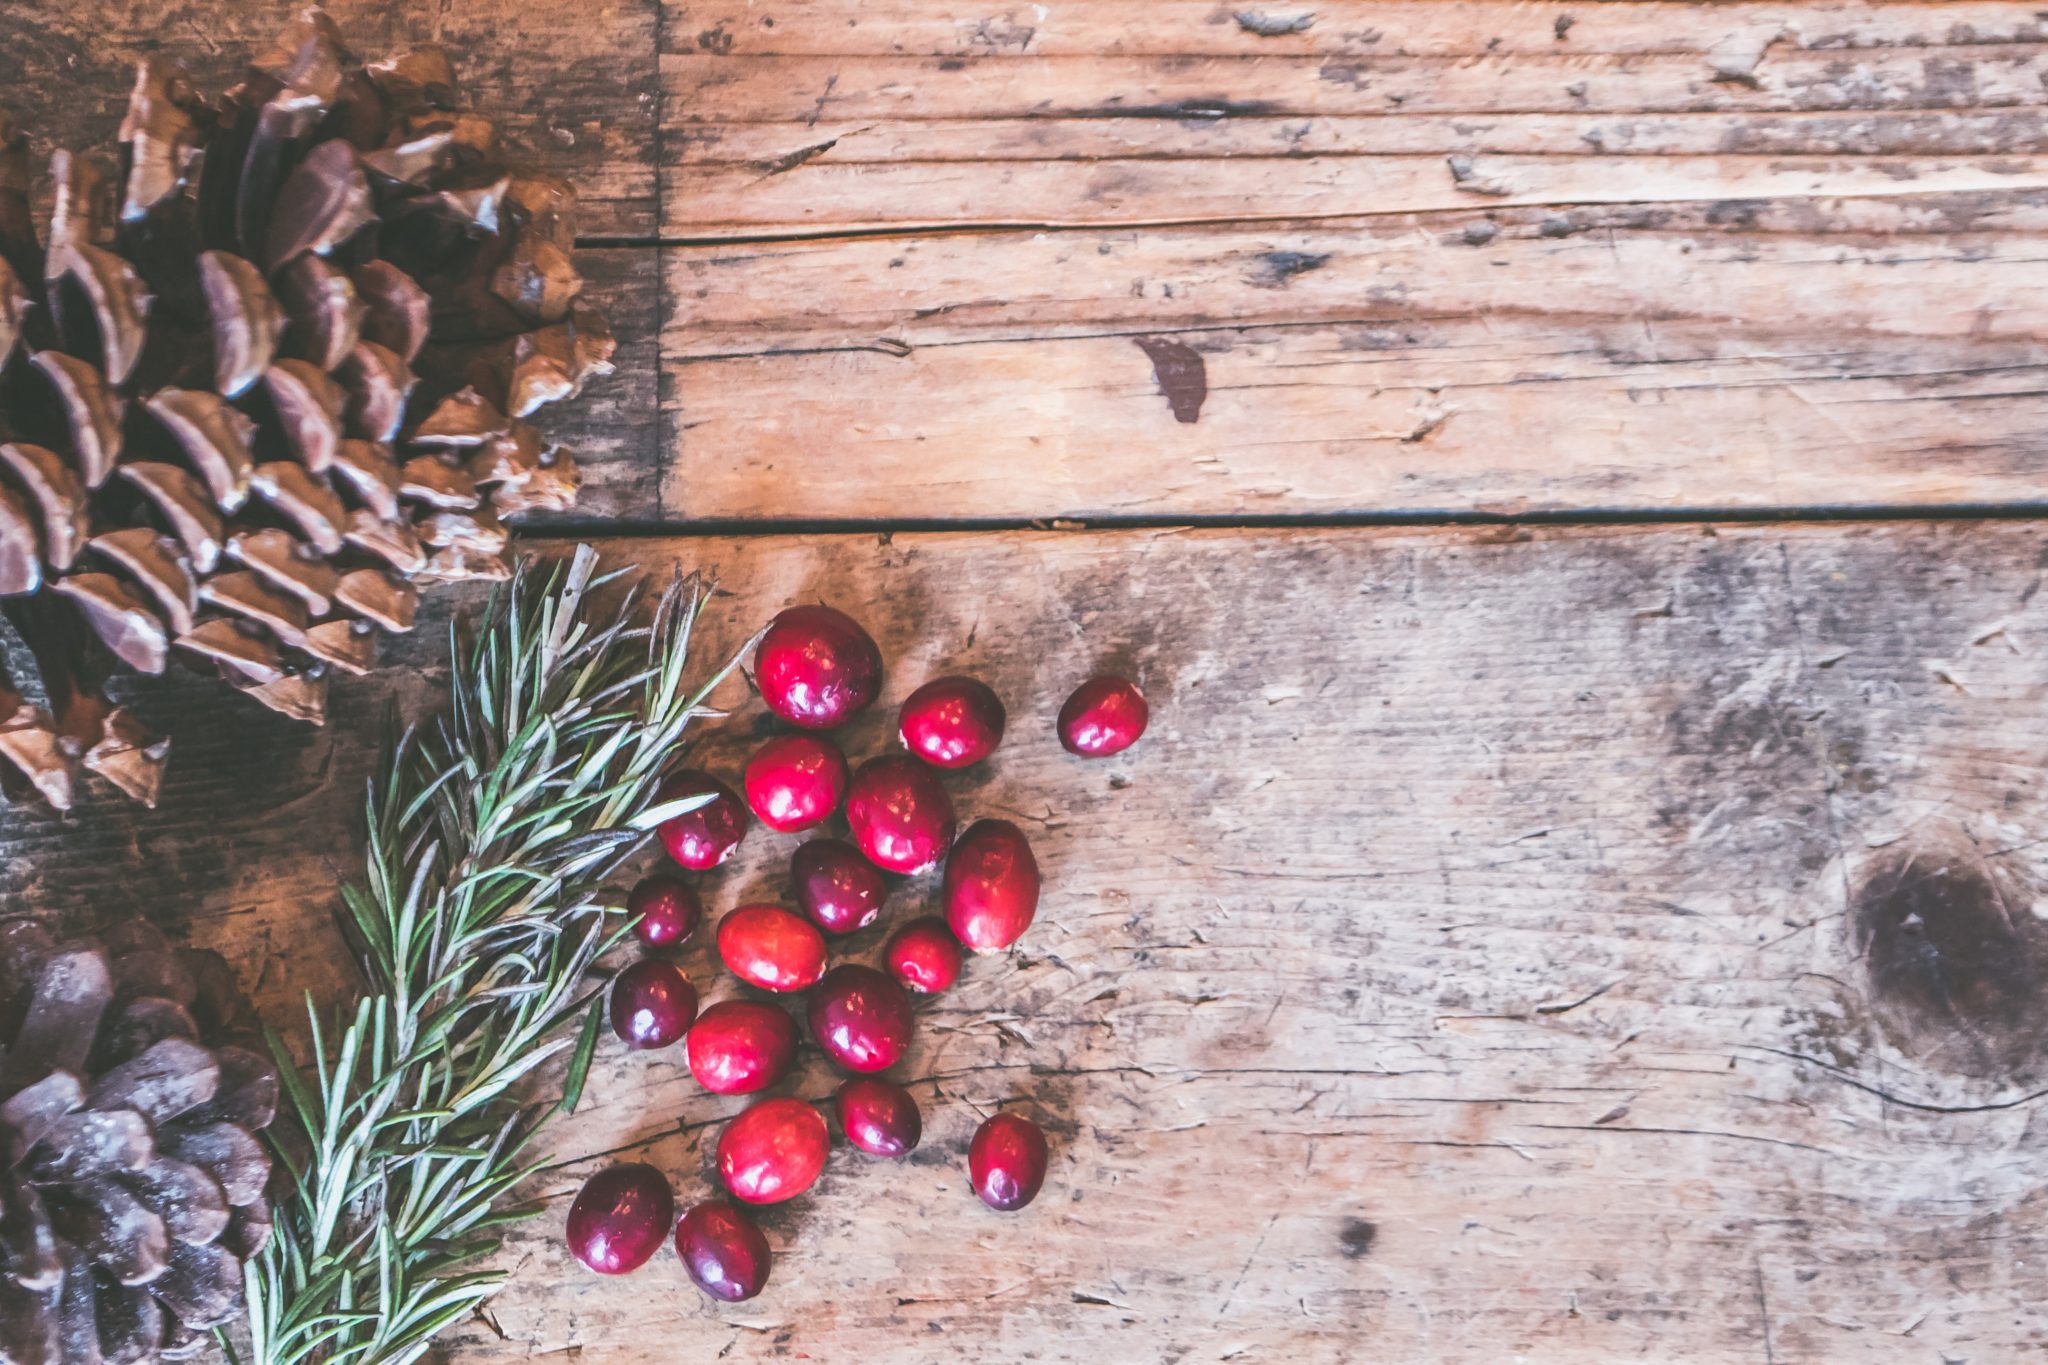 Pine cones and Cranberries sitting on a wood background